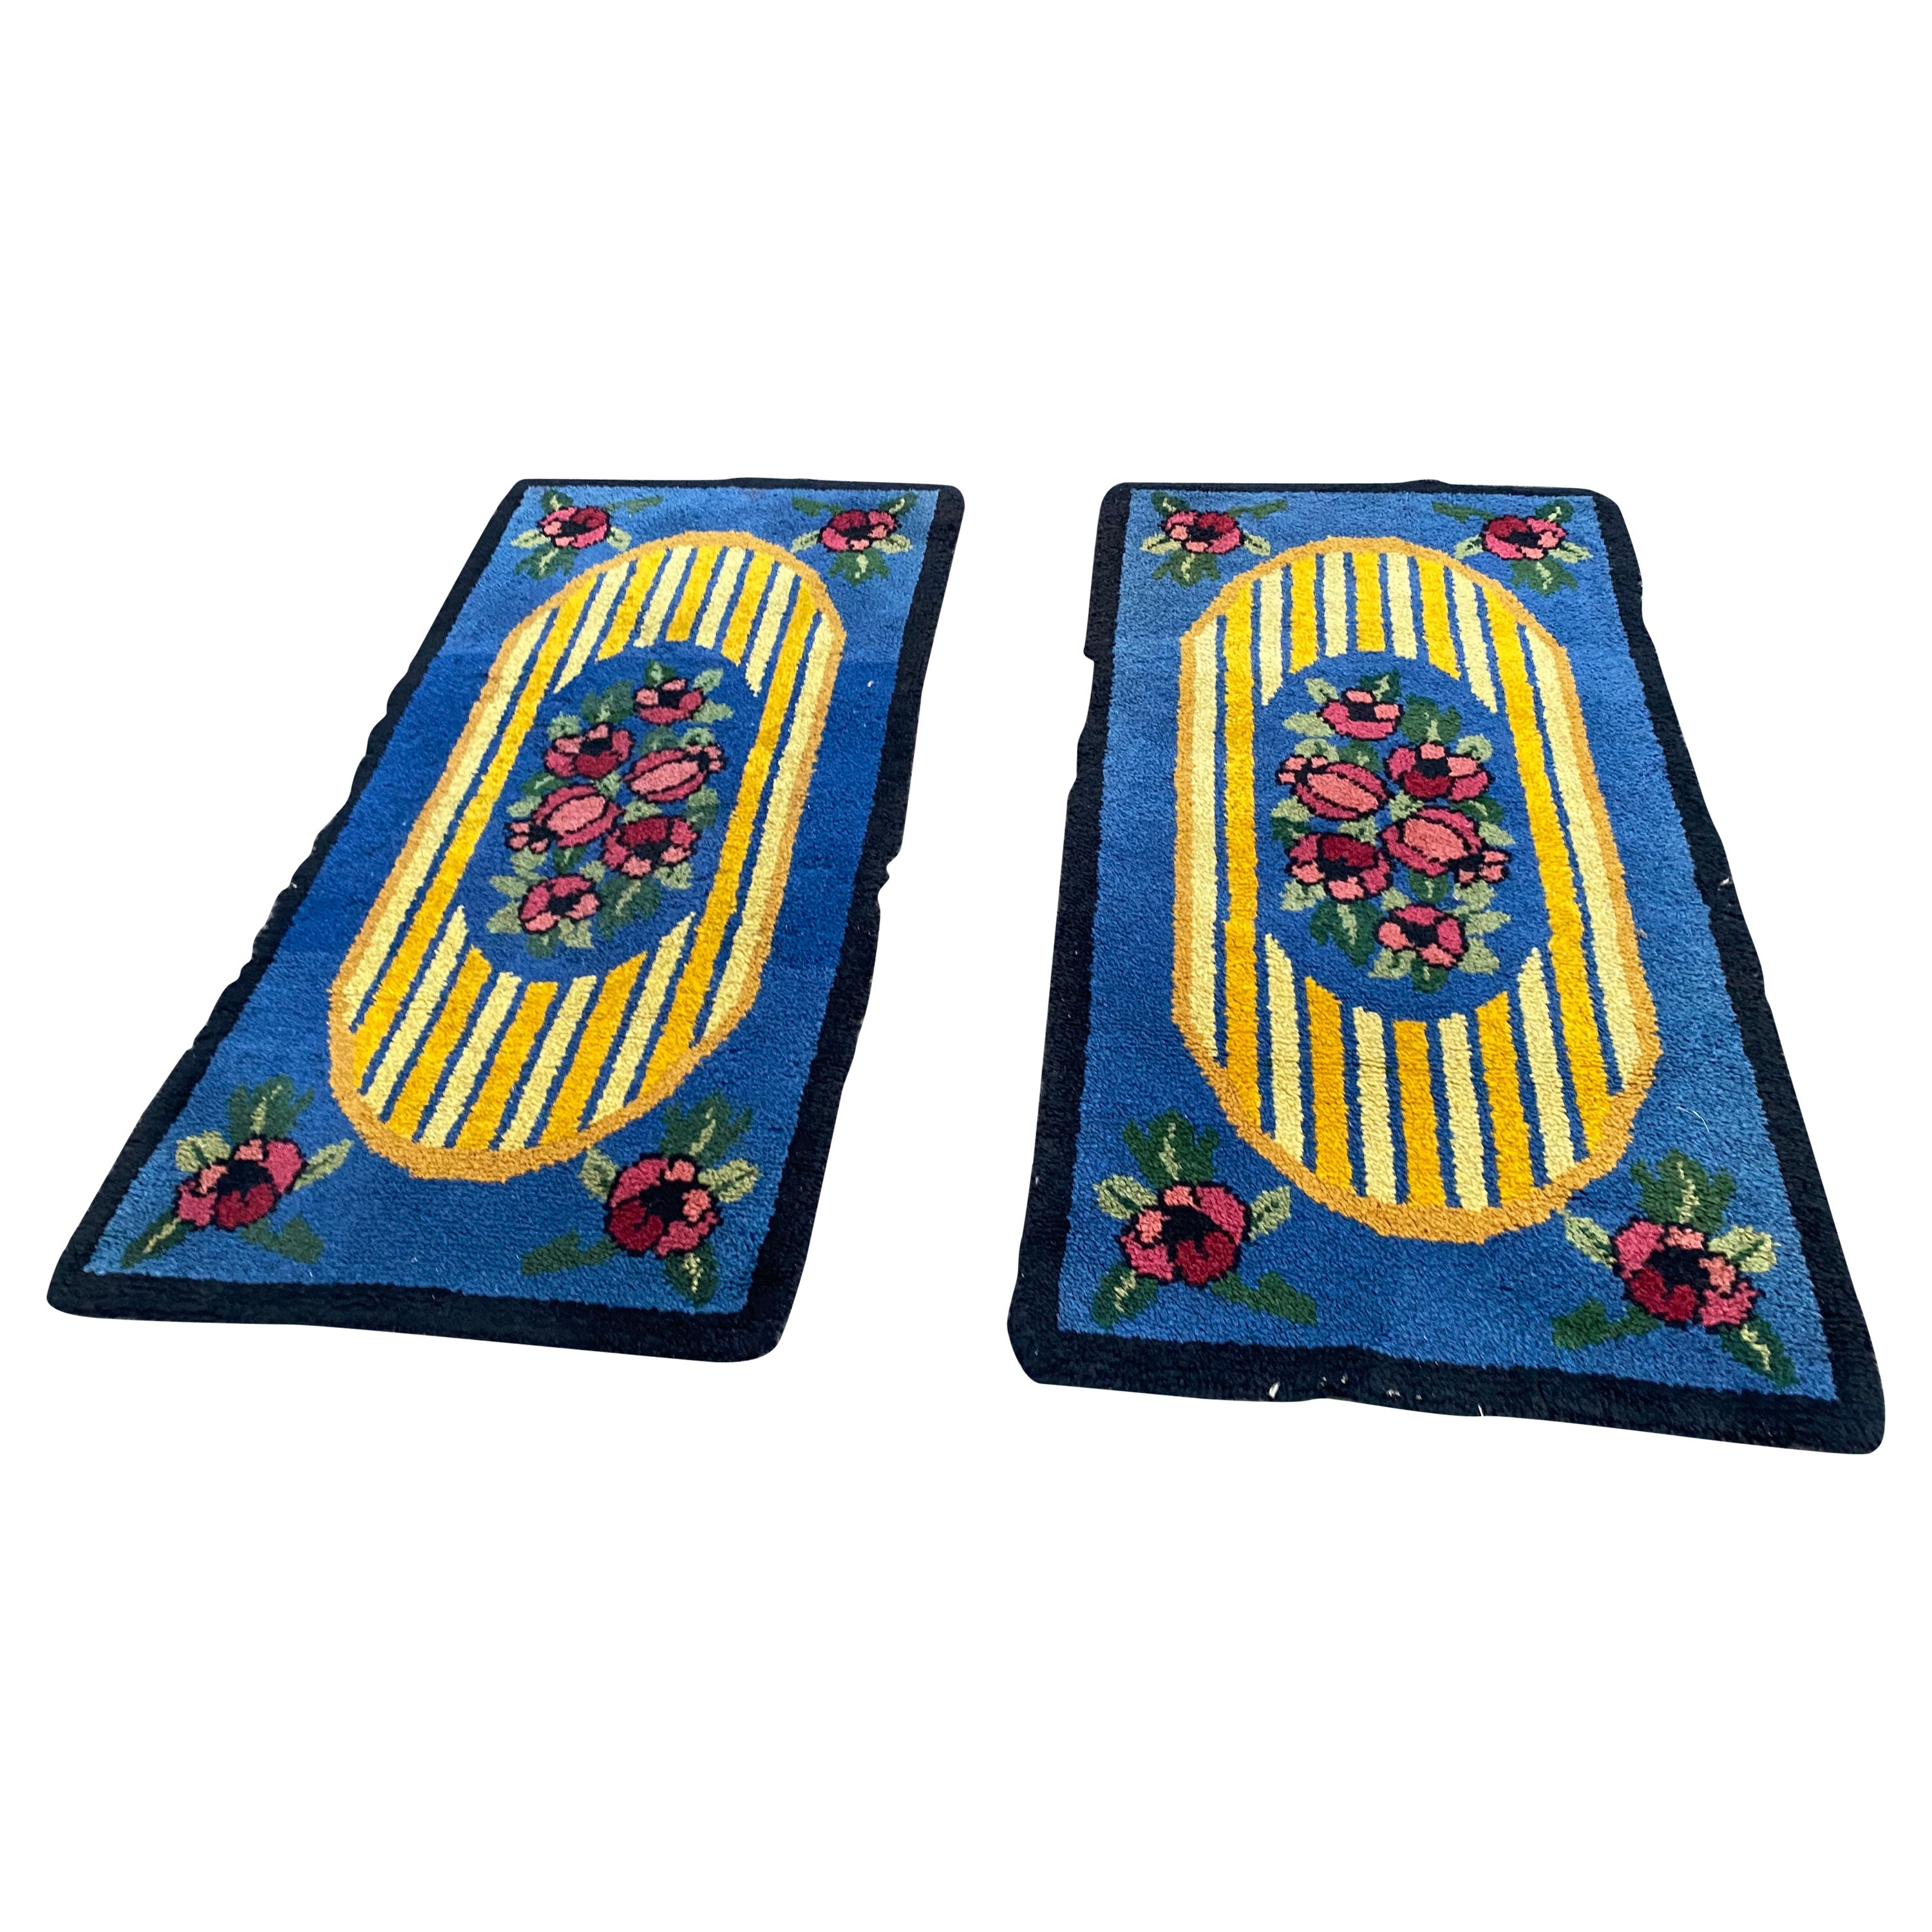 Two Small Hand-Knotted Wool Rugs from the Art Deco Period, circa 1930 For Sale